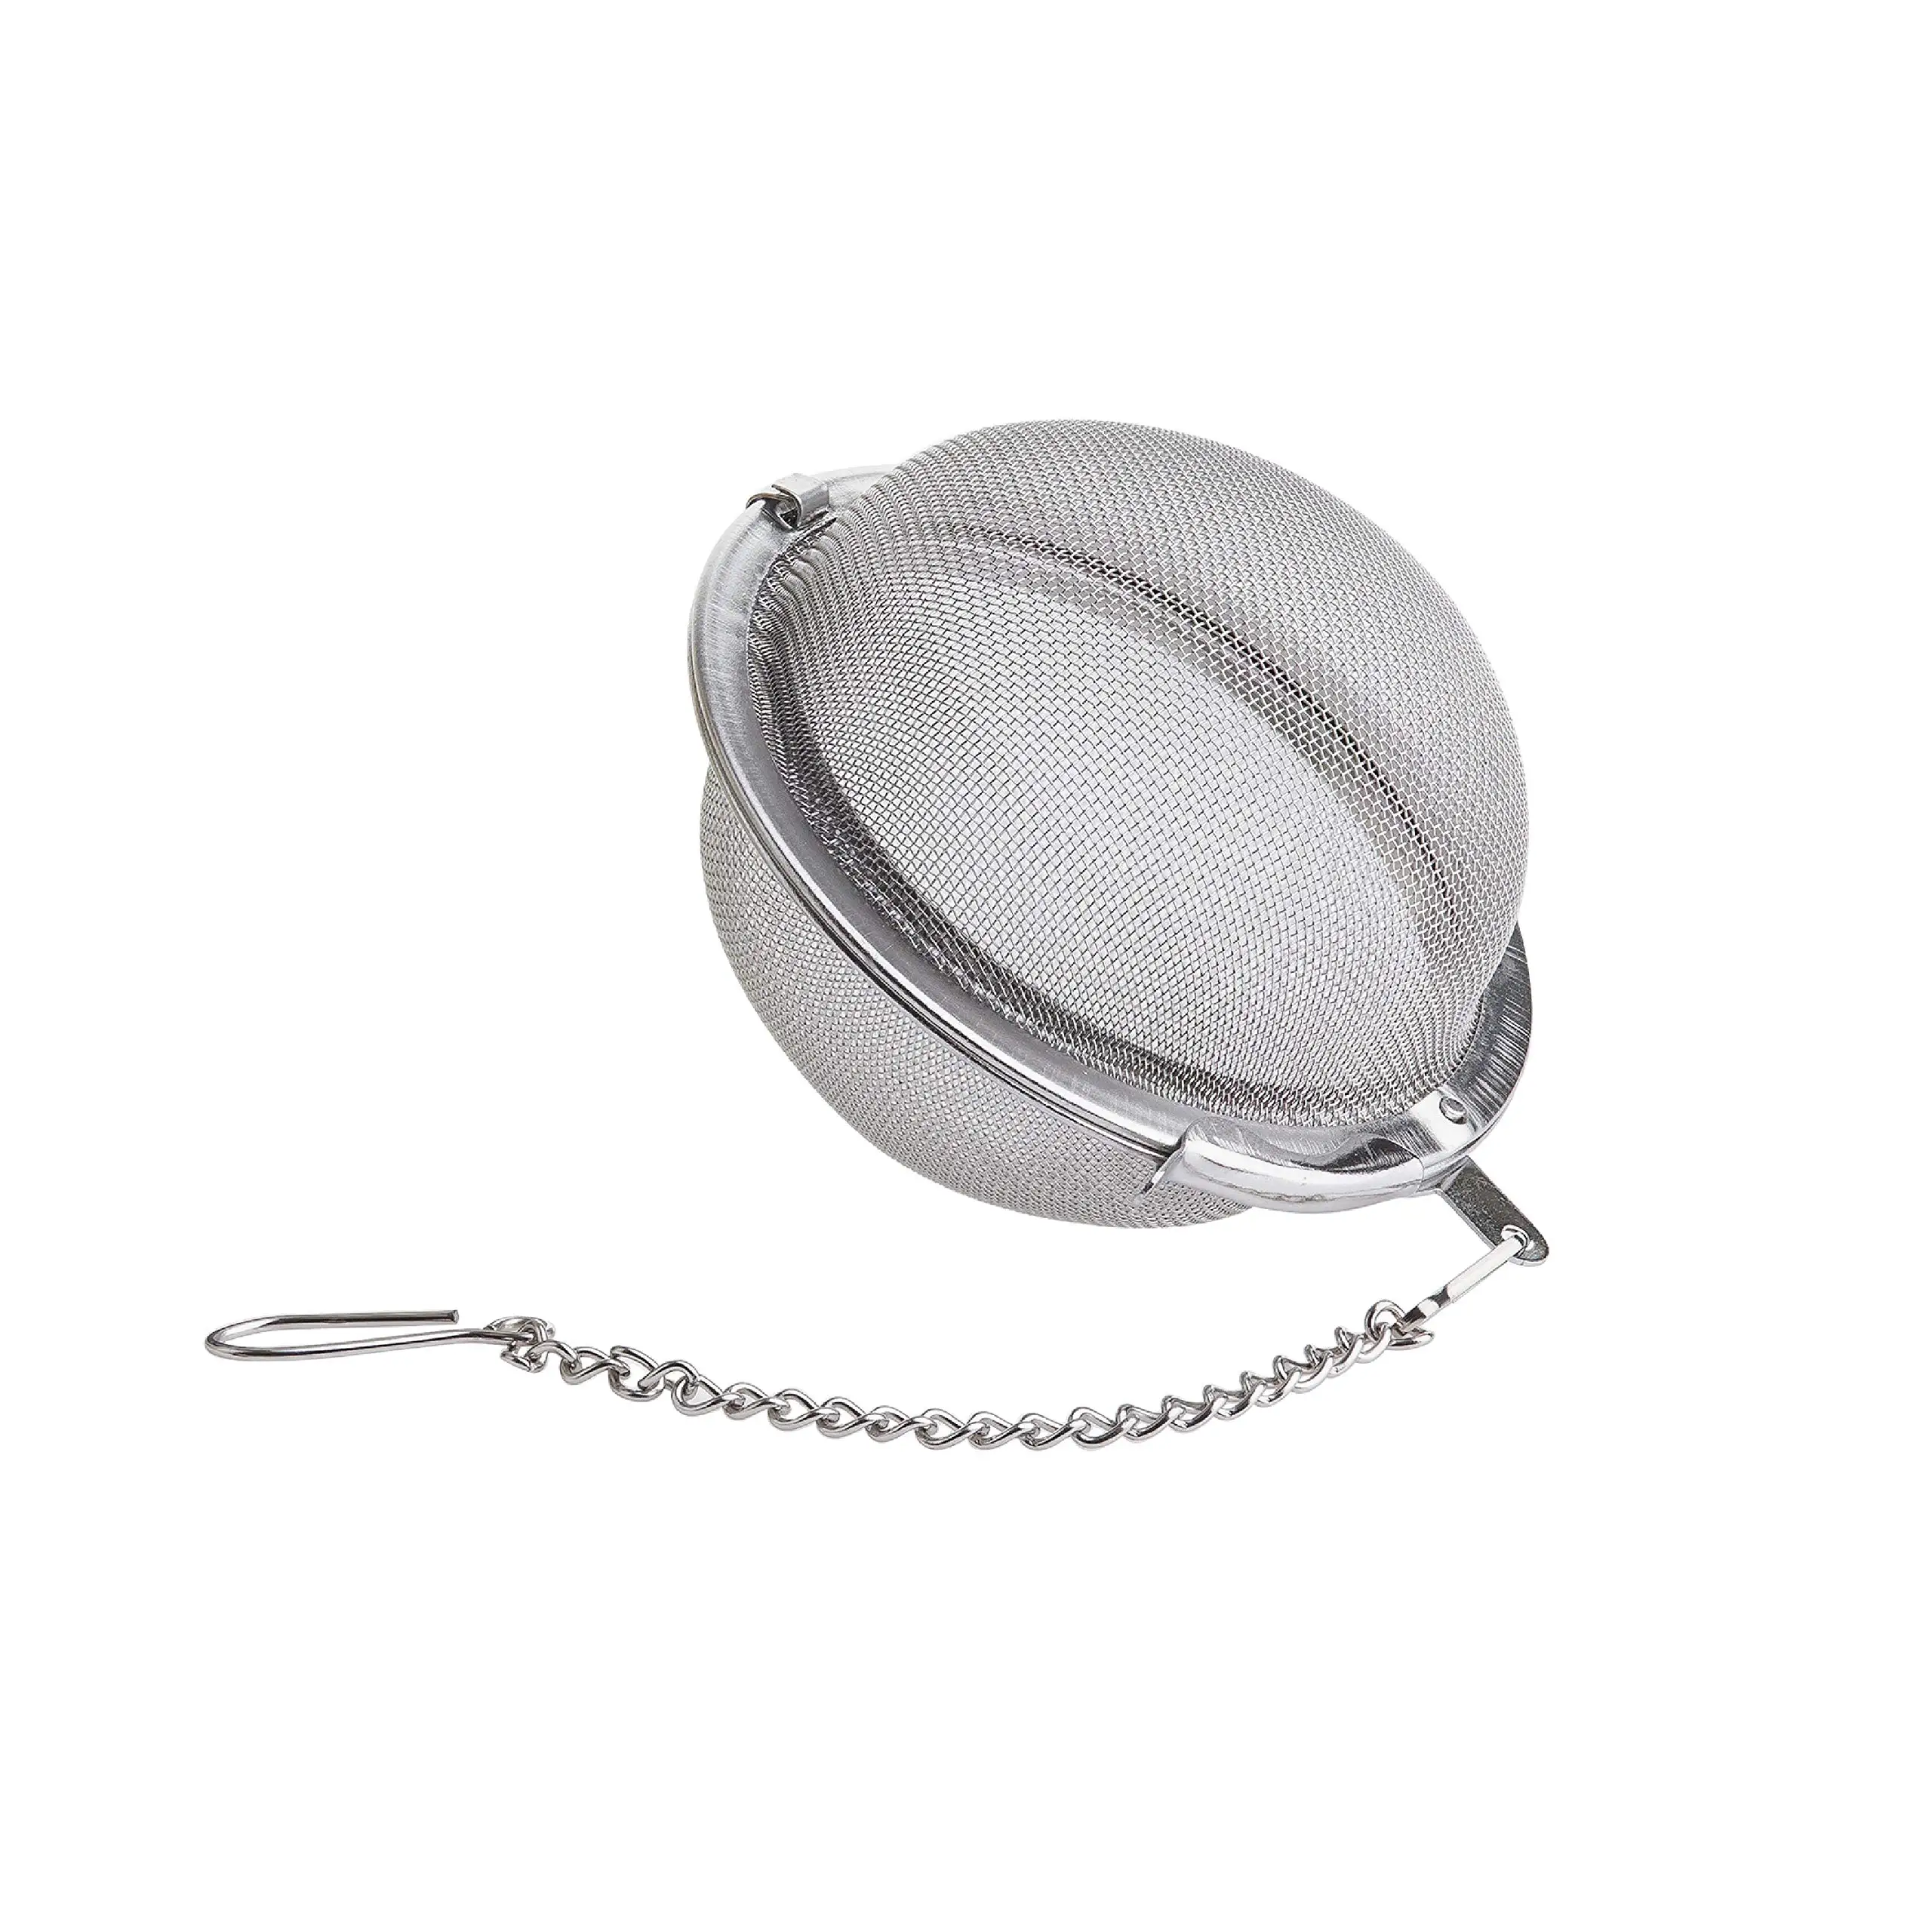 Details about   Herbal Stainless Steel Clip Tea Ball Strainer Mesh Infuser Filter Diffuser 